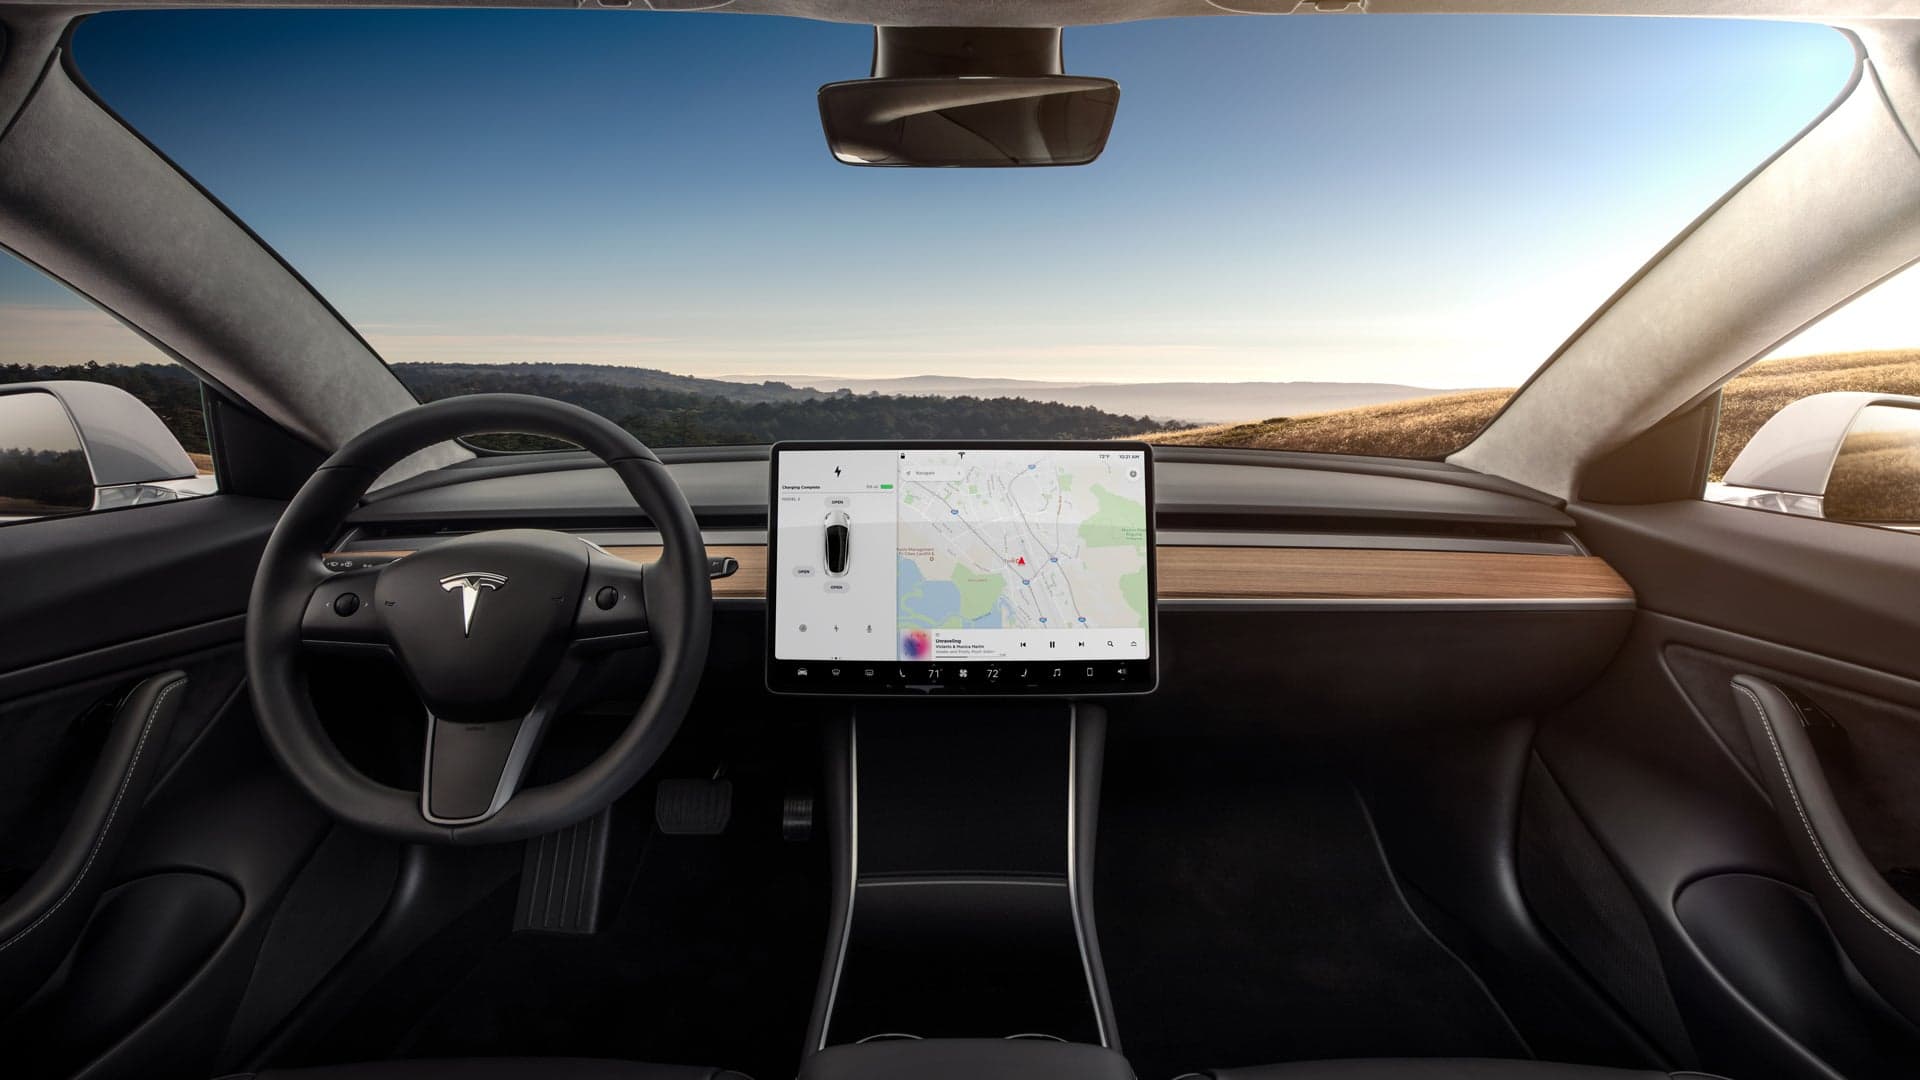 Tesla Model 3 Currently Leaves Drivers Without FM Radio, Bluetooth or USB Audio [Updated]